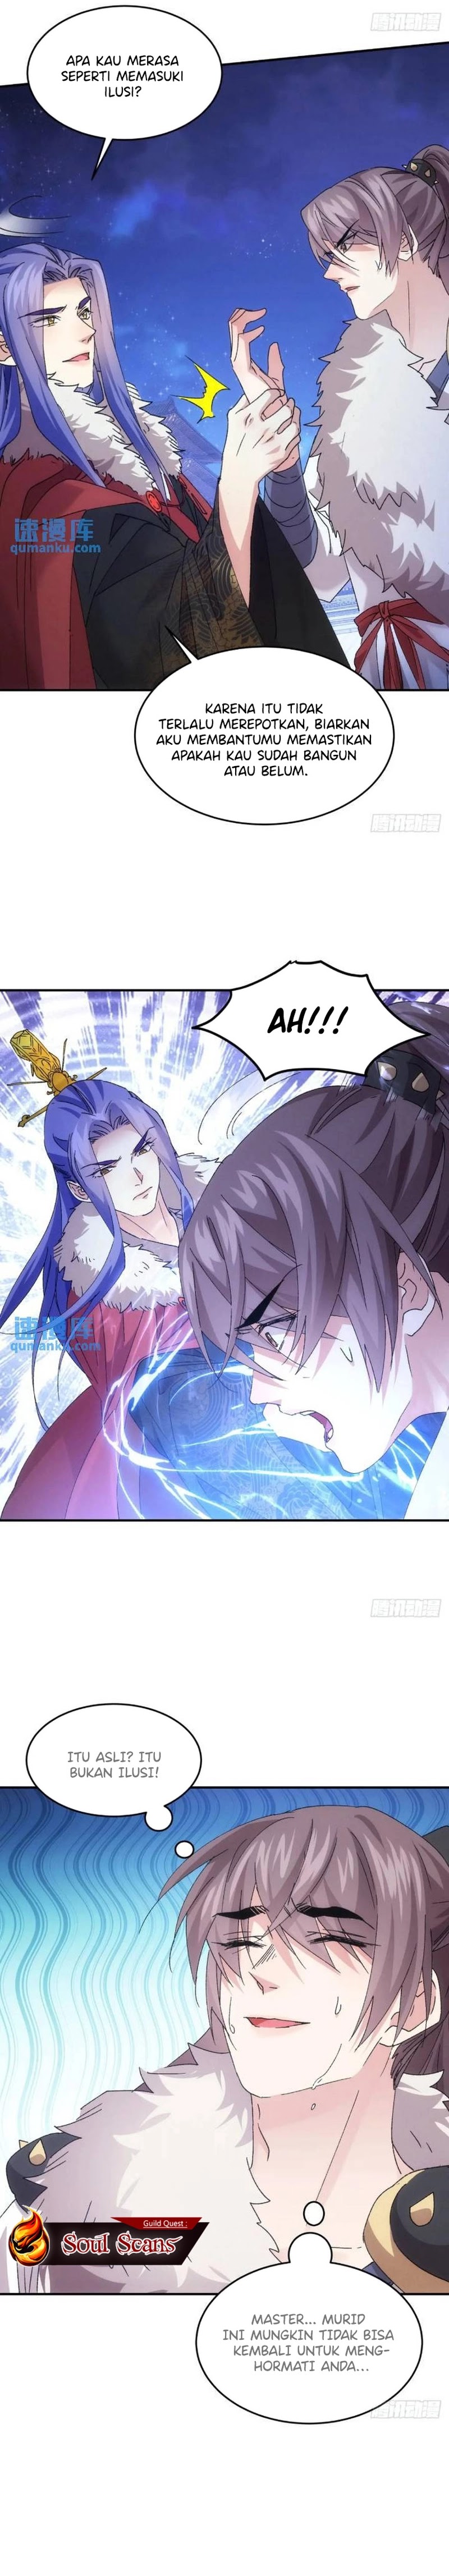 Dilarang COPAS - situs resmi www.mangacanblog.com - Komik i just dont play the card according to the routine 195 - chapter 195 196 Indonesia i just dont play the card according to the routine 195 - chapter 195 Terbaru 3|Baca Manga Komik Indonesia|Mangacan